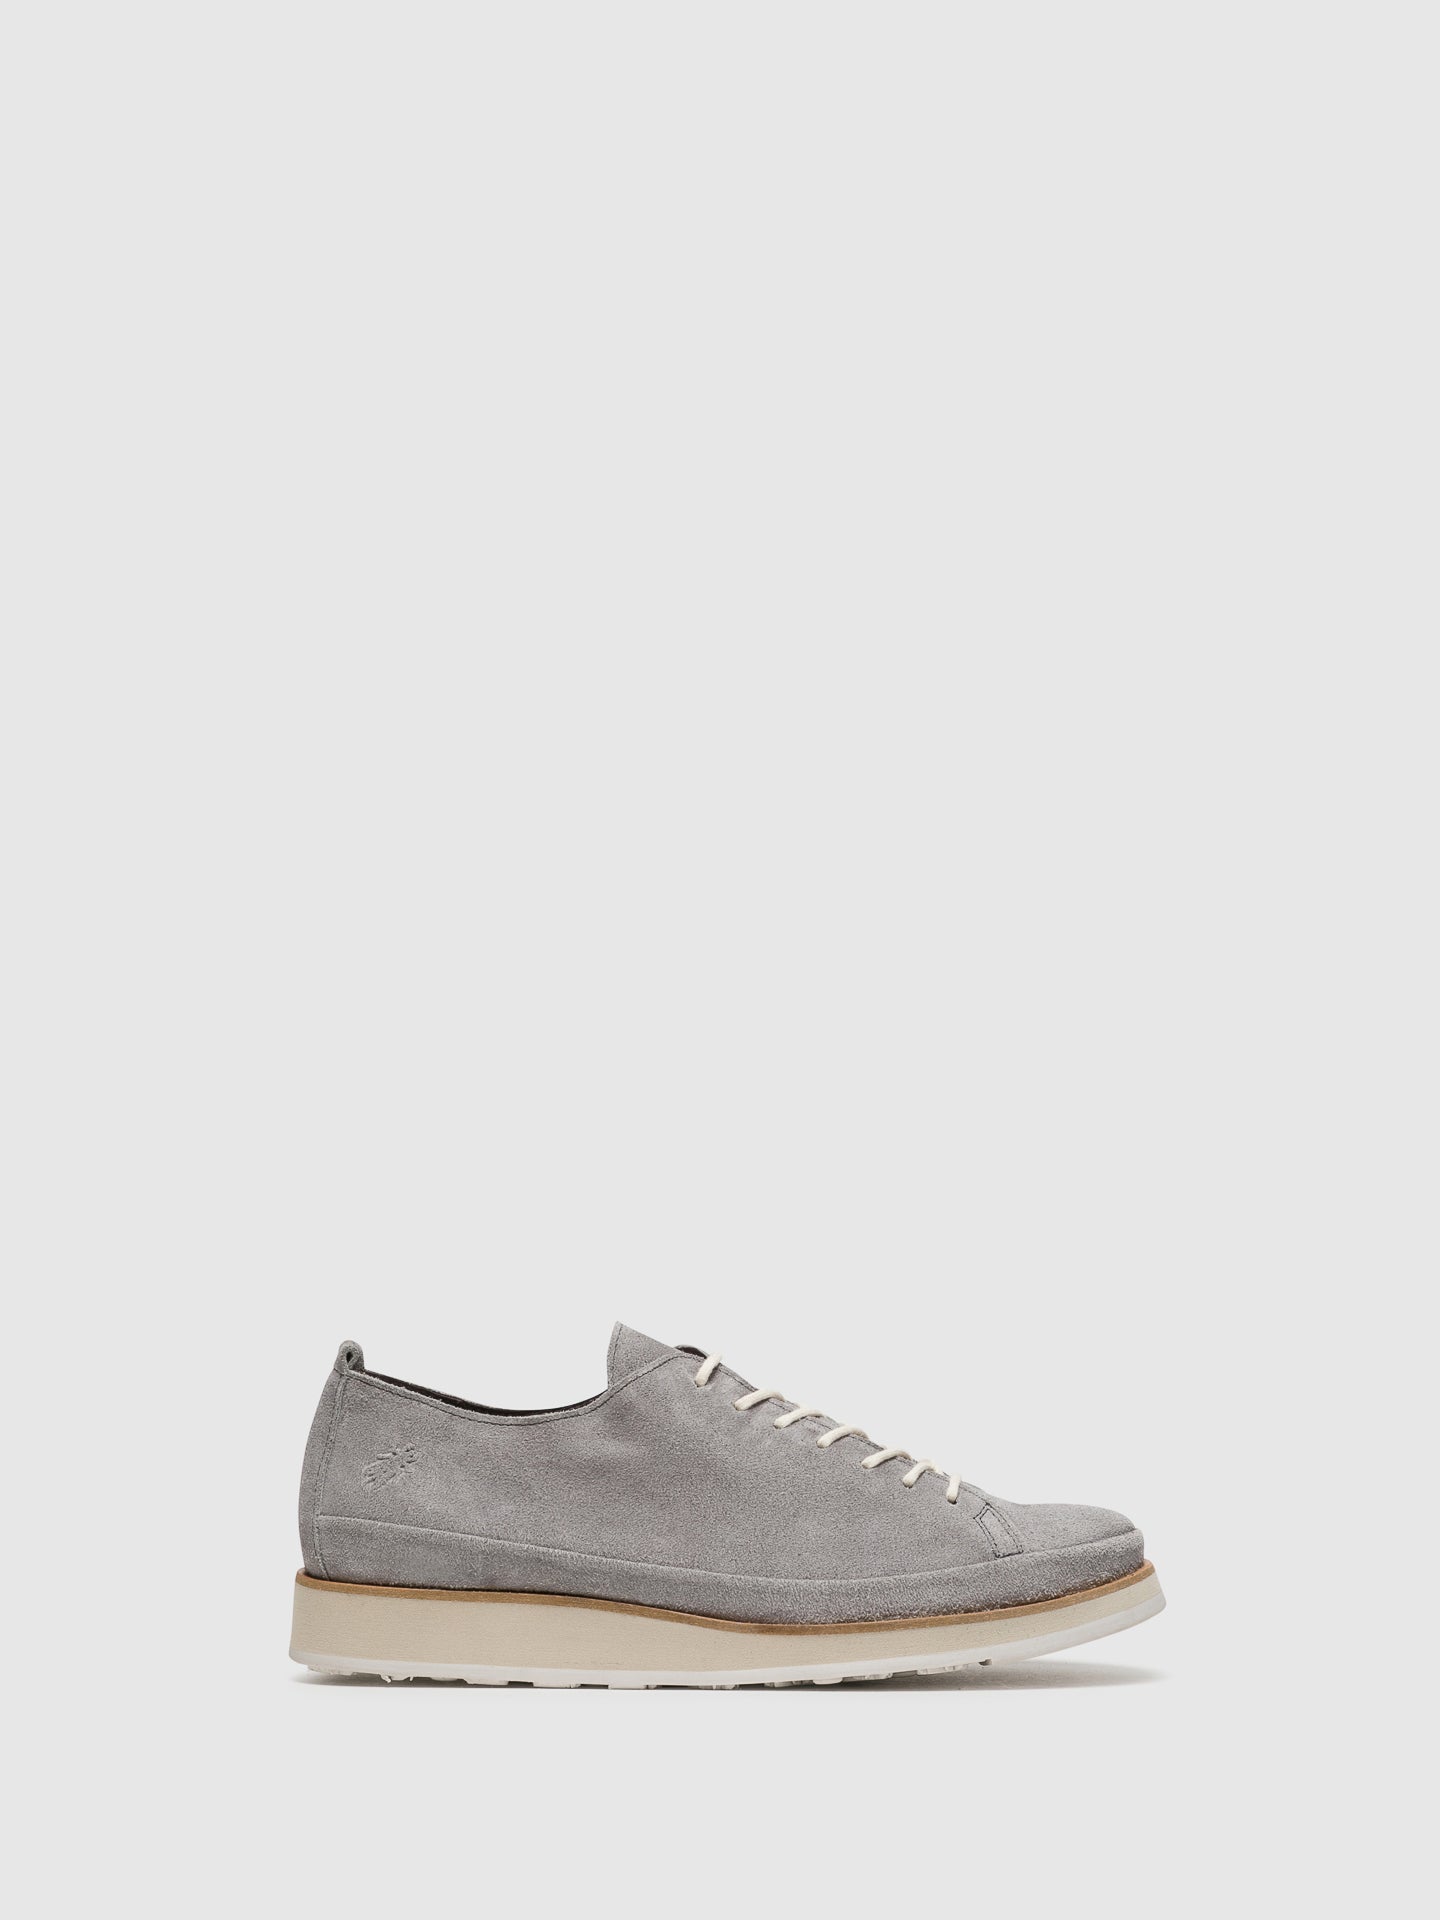 Fly London Gray Lace-up Shoes